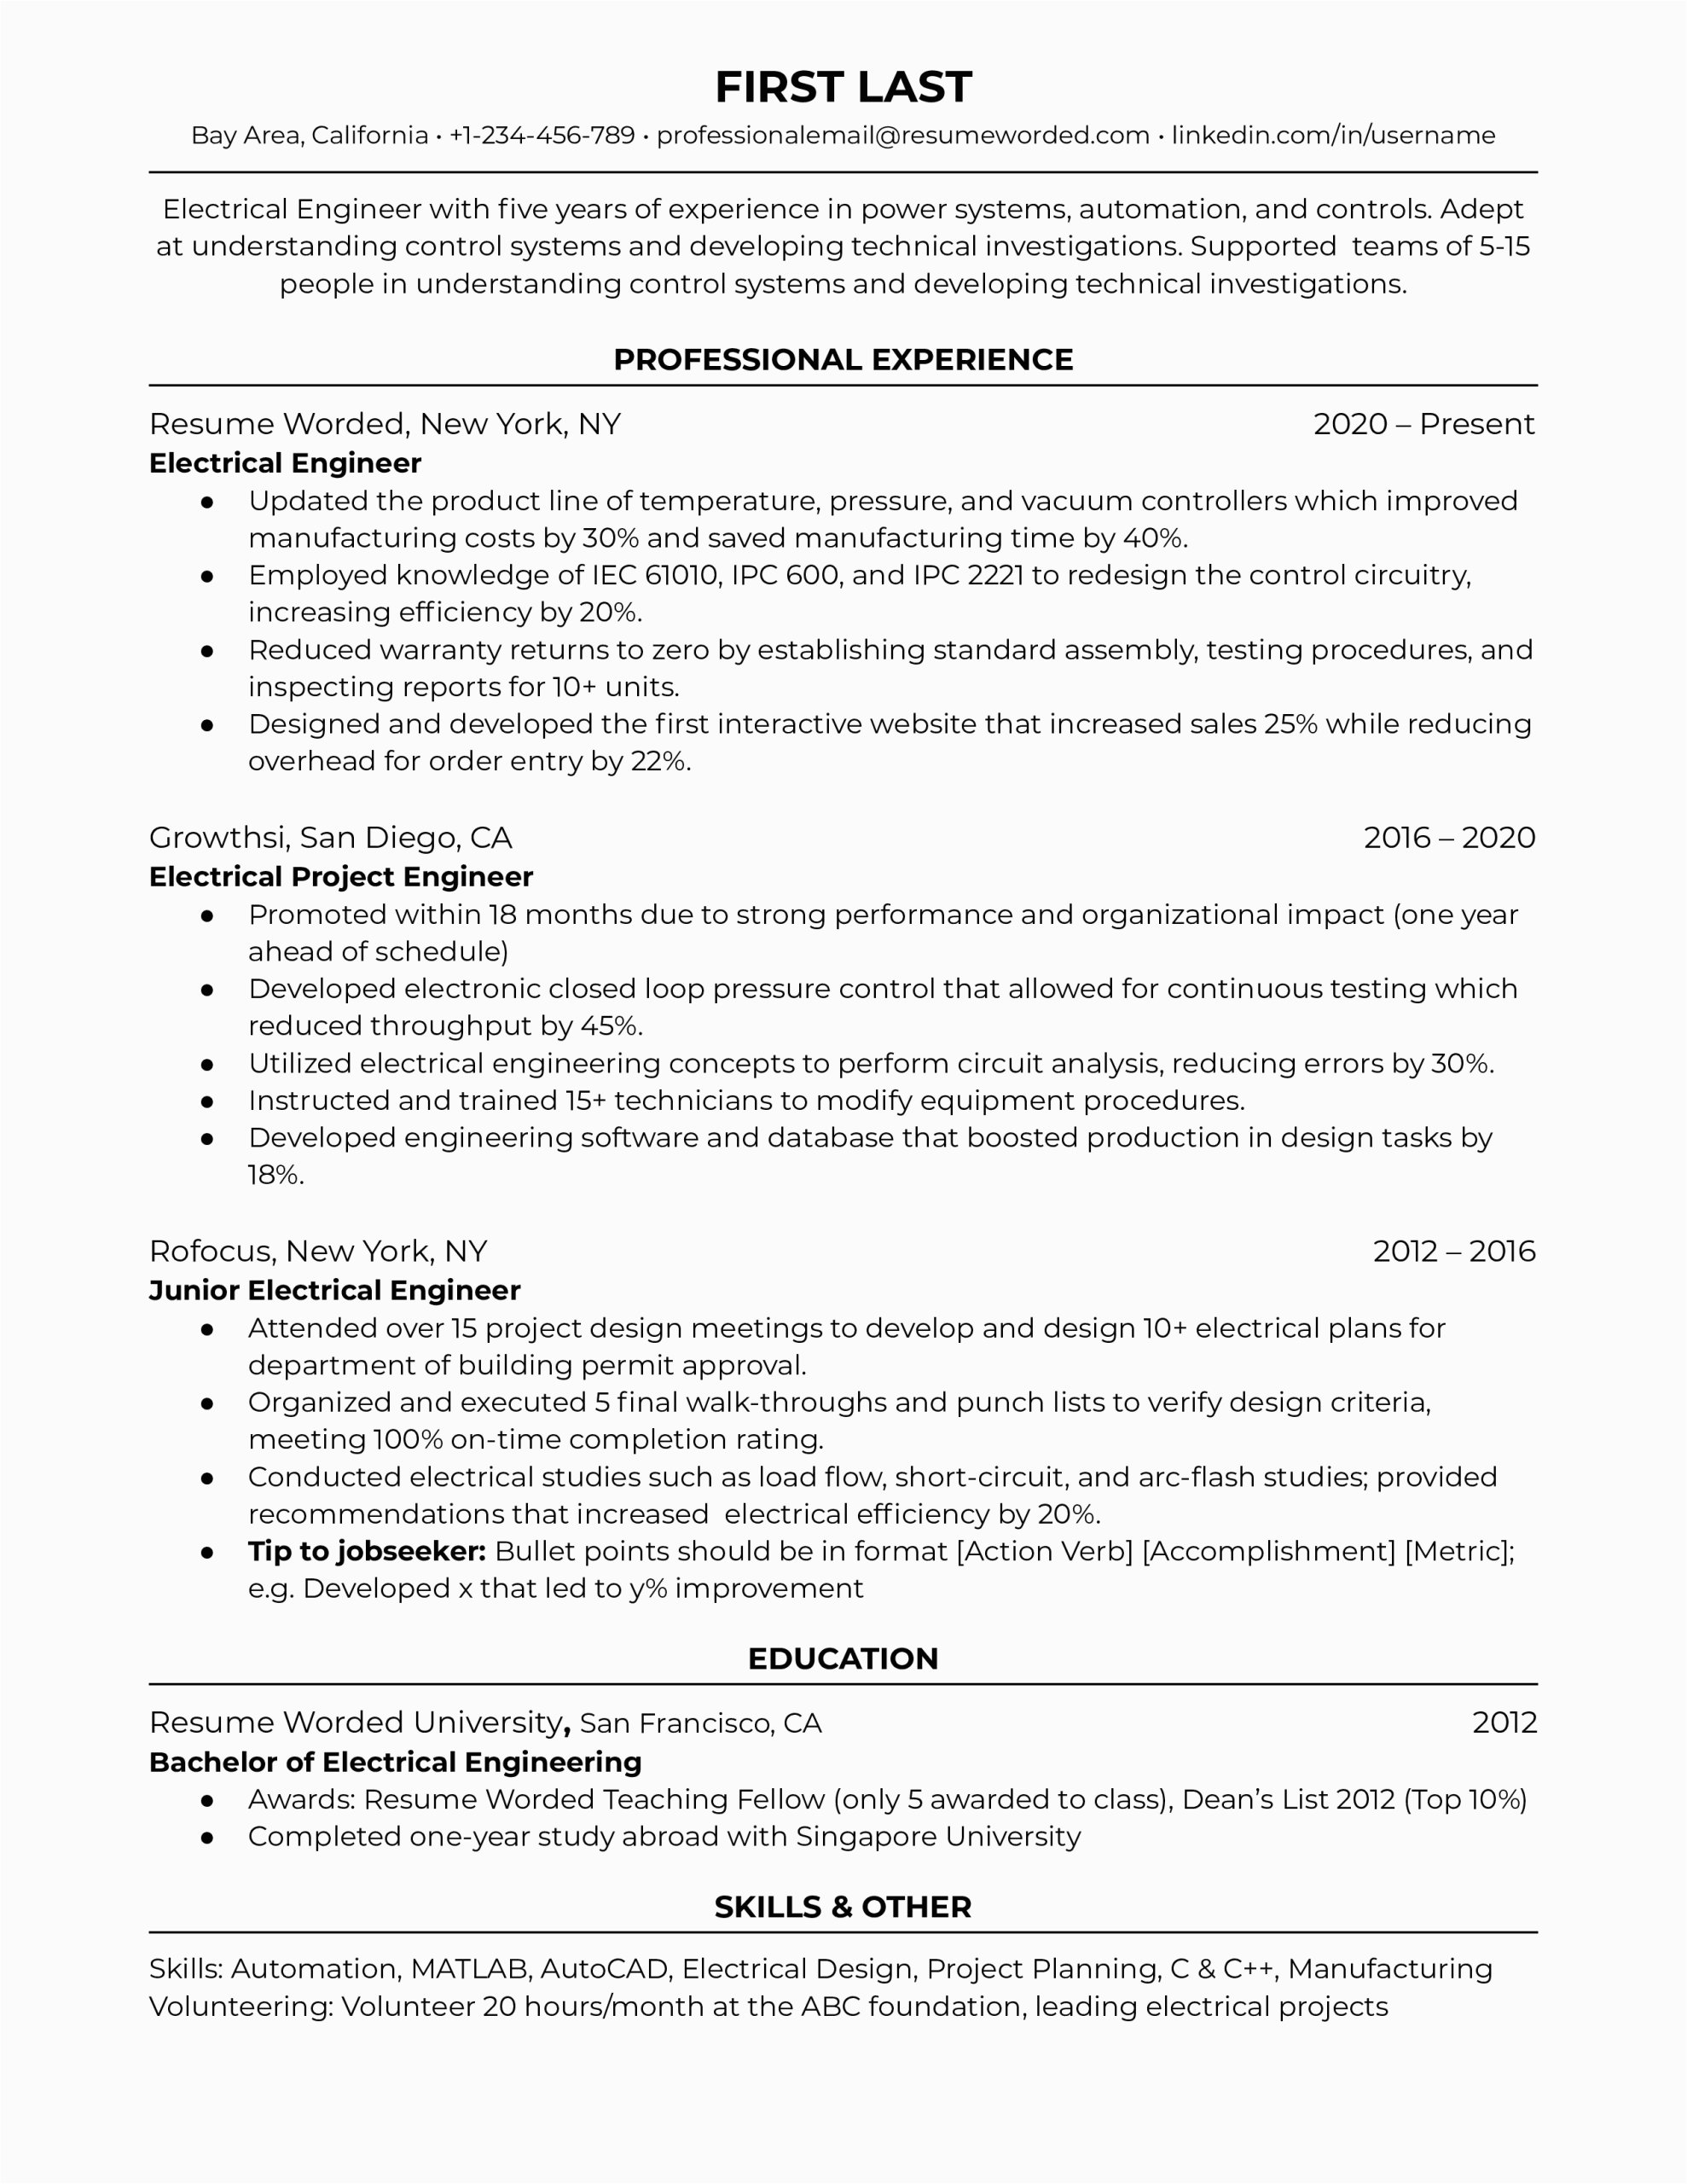 Experience Resume Sample for Electrical Engineer 5 Electrical Engineer Resume Examples for 2022